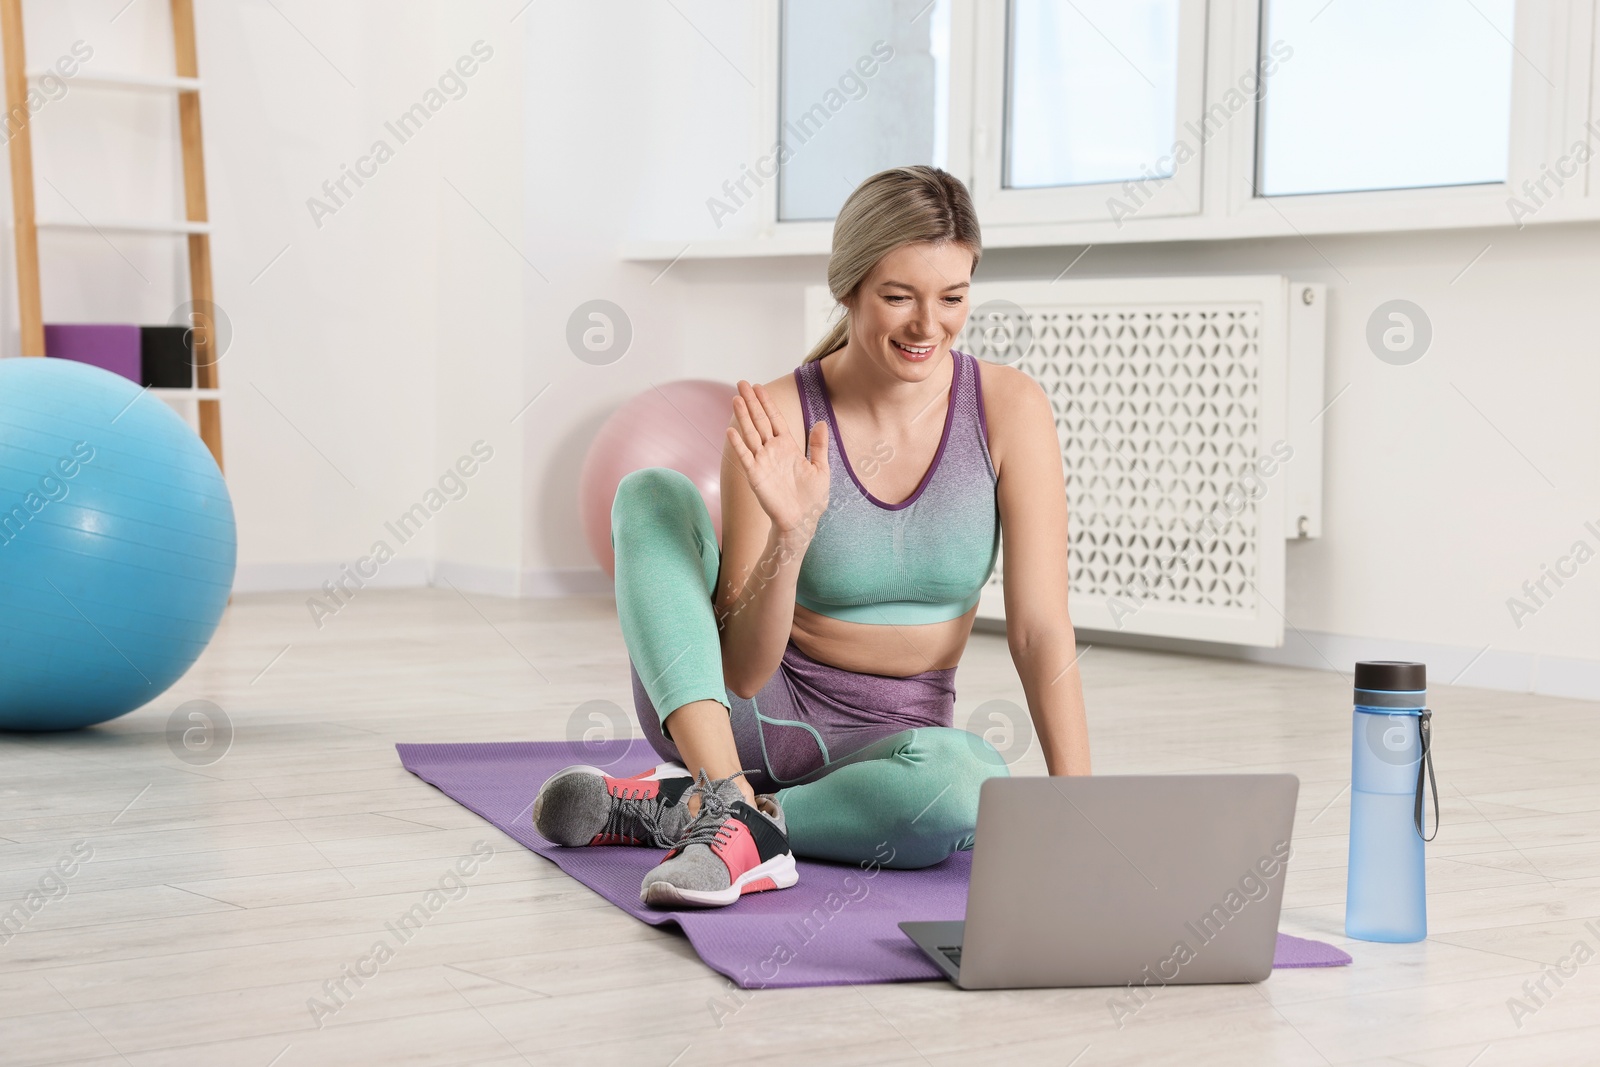 Photo of Online fitness trainer. Woman having video chat via laptop at home